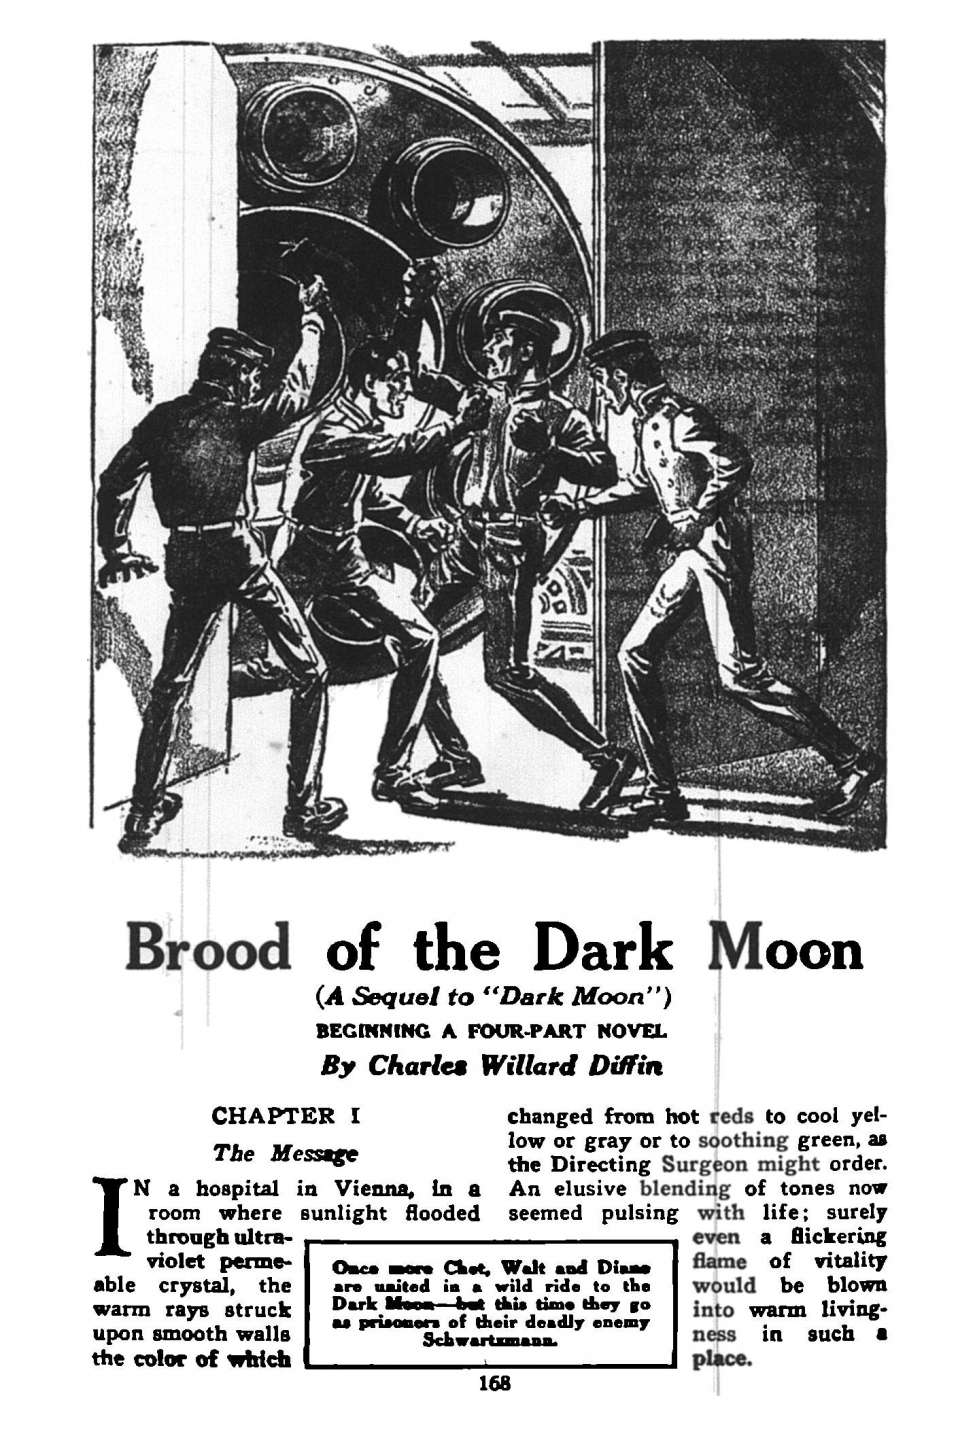 Comic Book Cover For Astounding Serial - Brood of the Dark Moon - C W Diffin